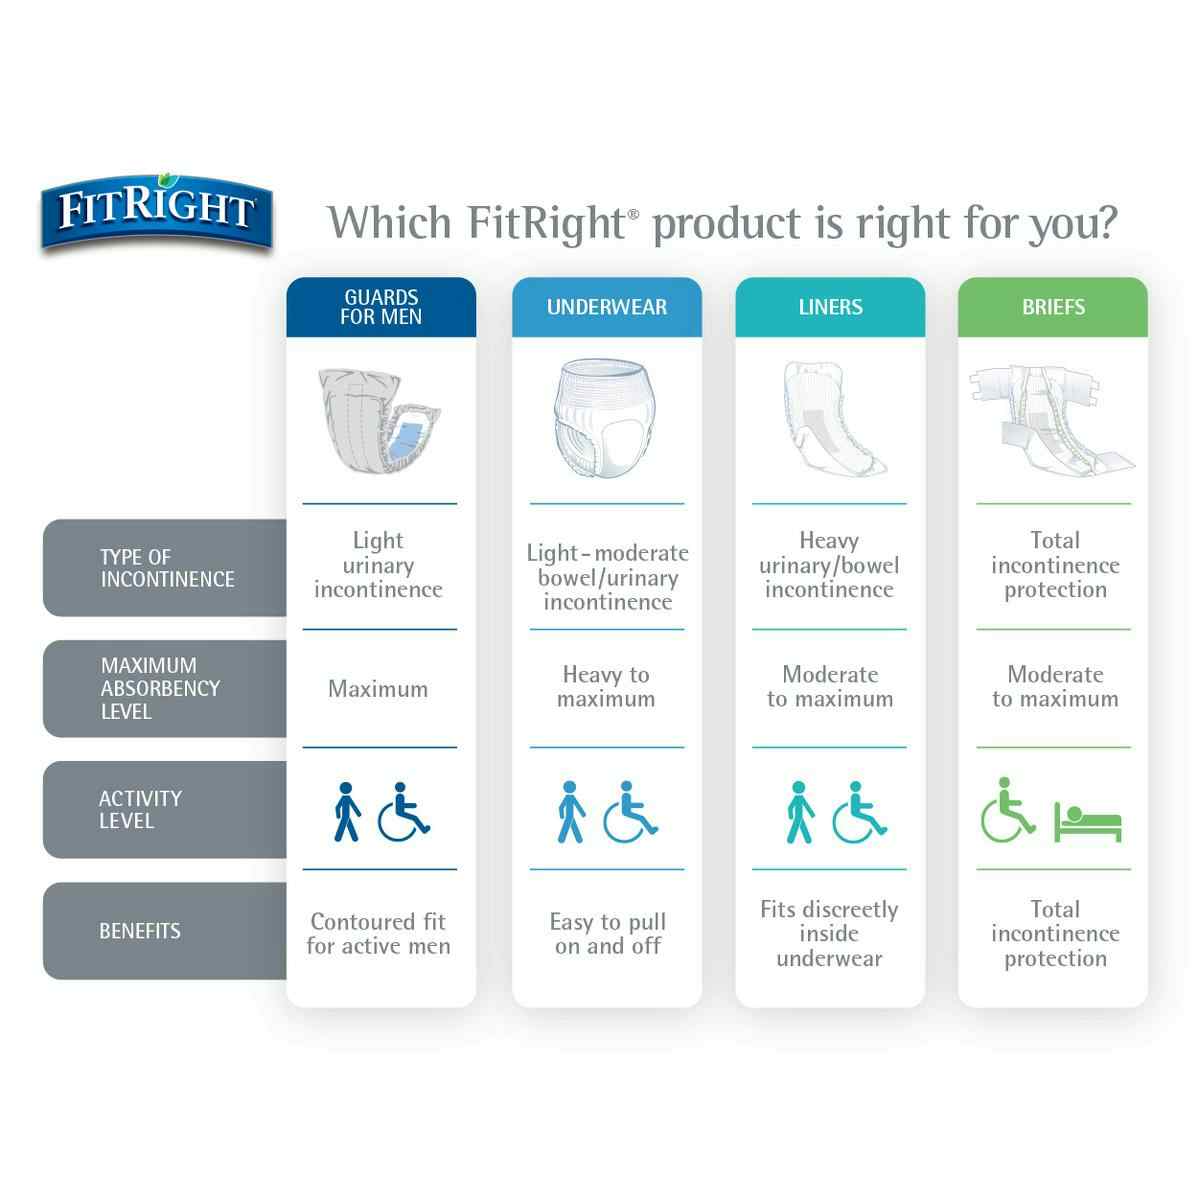 FitRight OptiFit Extra Incontinence Briefs with Center Tab, Heavy Absorbency, Product Guide